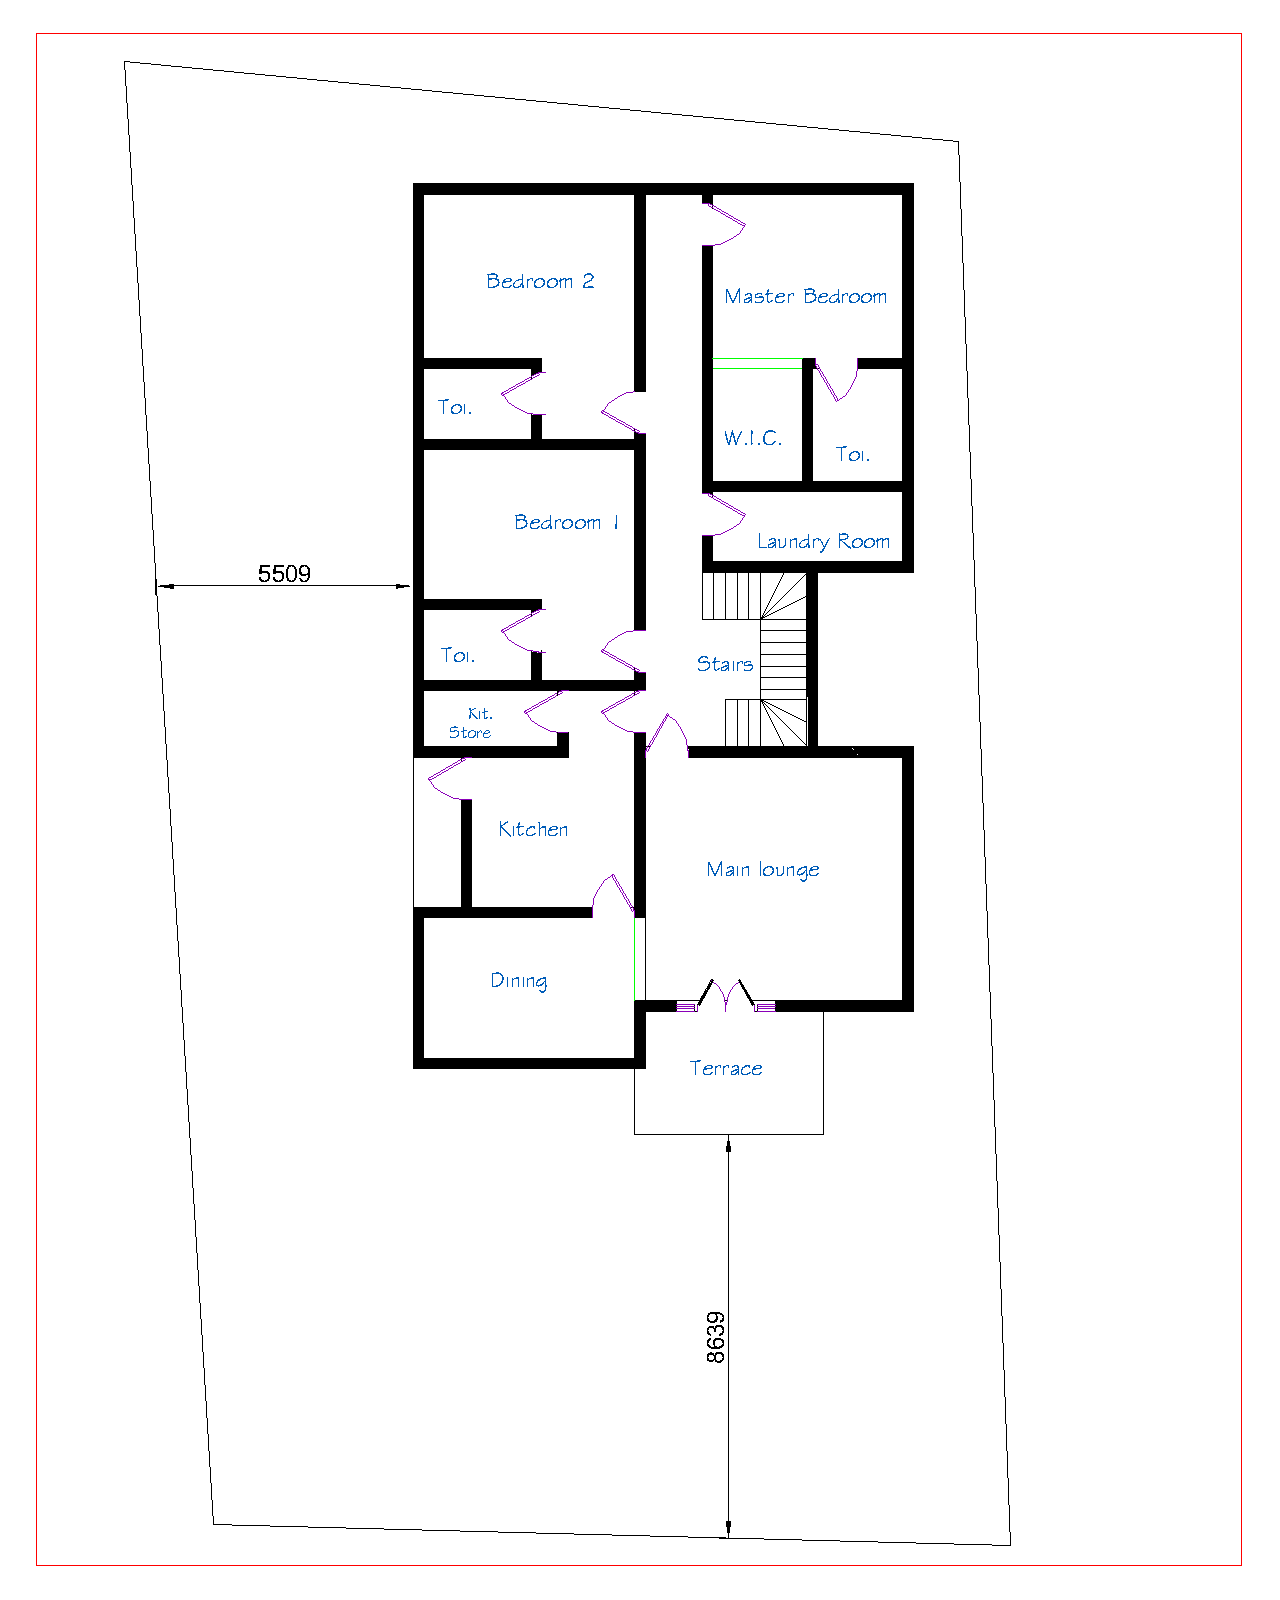 Get Any Floor Plan For Free Here Properties Nigeria